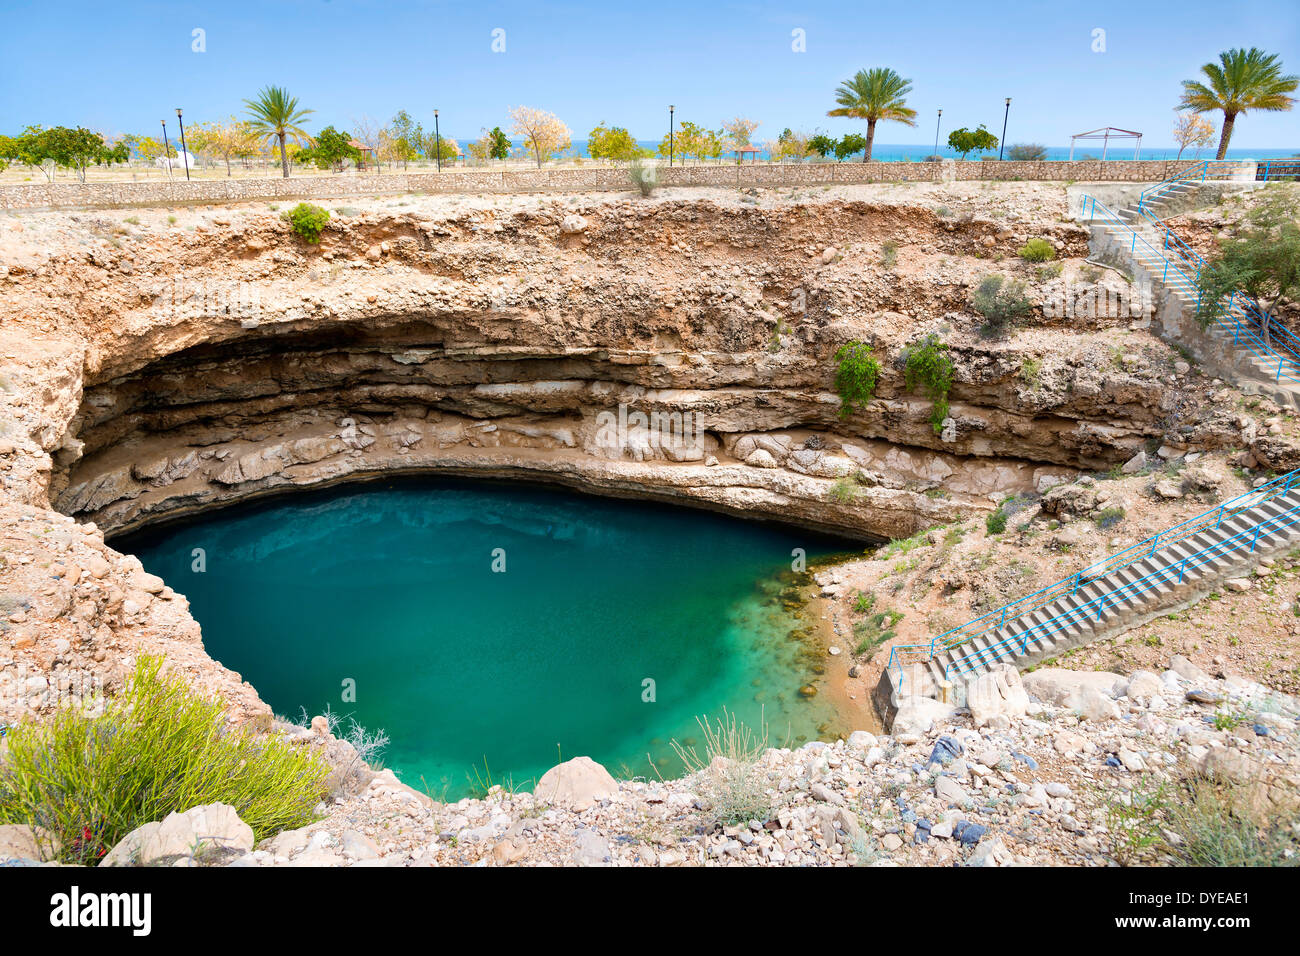 Picture of the Bimmah sinkhole in Oman Stock Photo